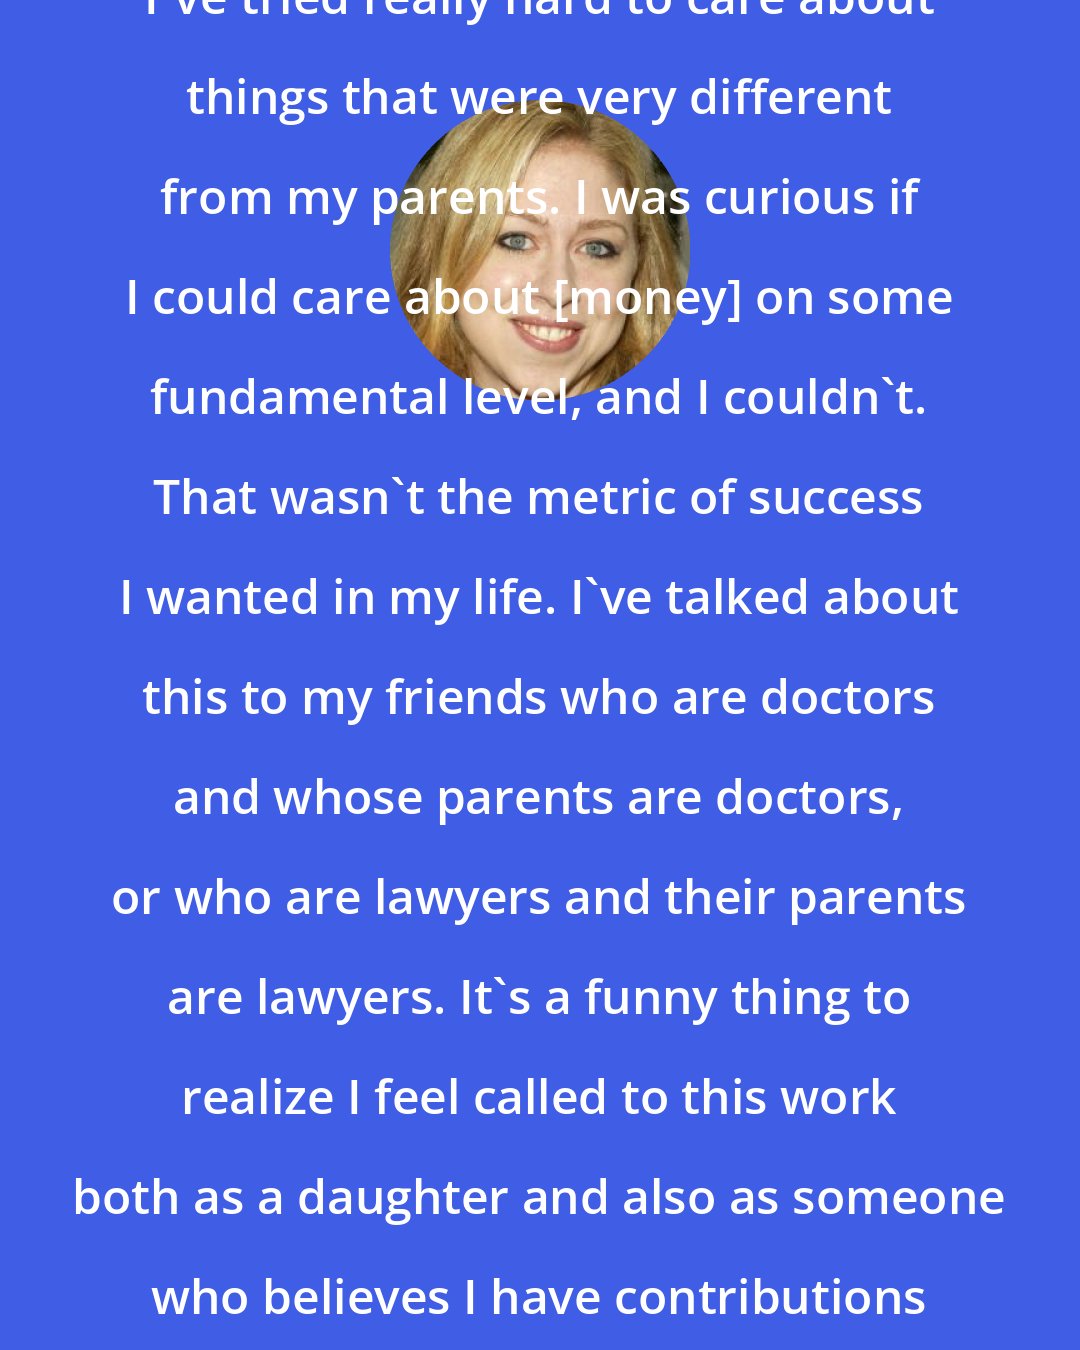 Chelsea Clinton: I've tried really hard to care about things that were very different from my parents. I was curious if I could care about [money] on some fundamental level, and I couldn't. That wasn't the metric of success I wanted in my life. I've talked about this to my friends who are doctors and whose parents are doctors, or who are lawyers and their parents are lawyers. It's a funny thing to realize I feel called to this work both as a daughter and also as someone who believes I have contributions to make.